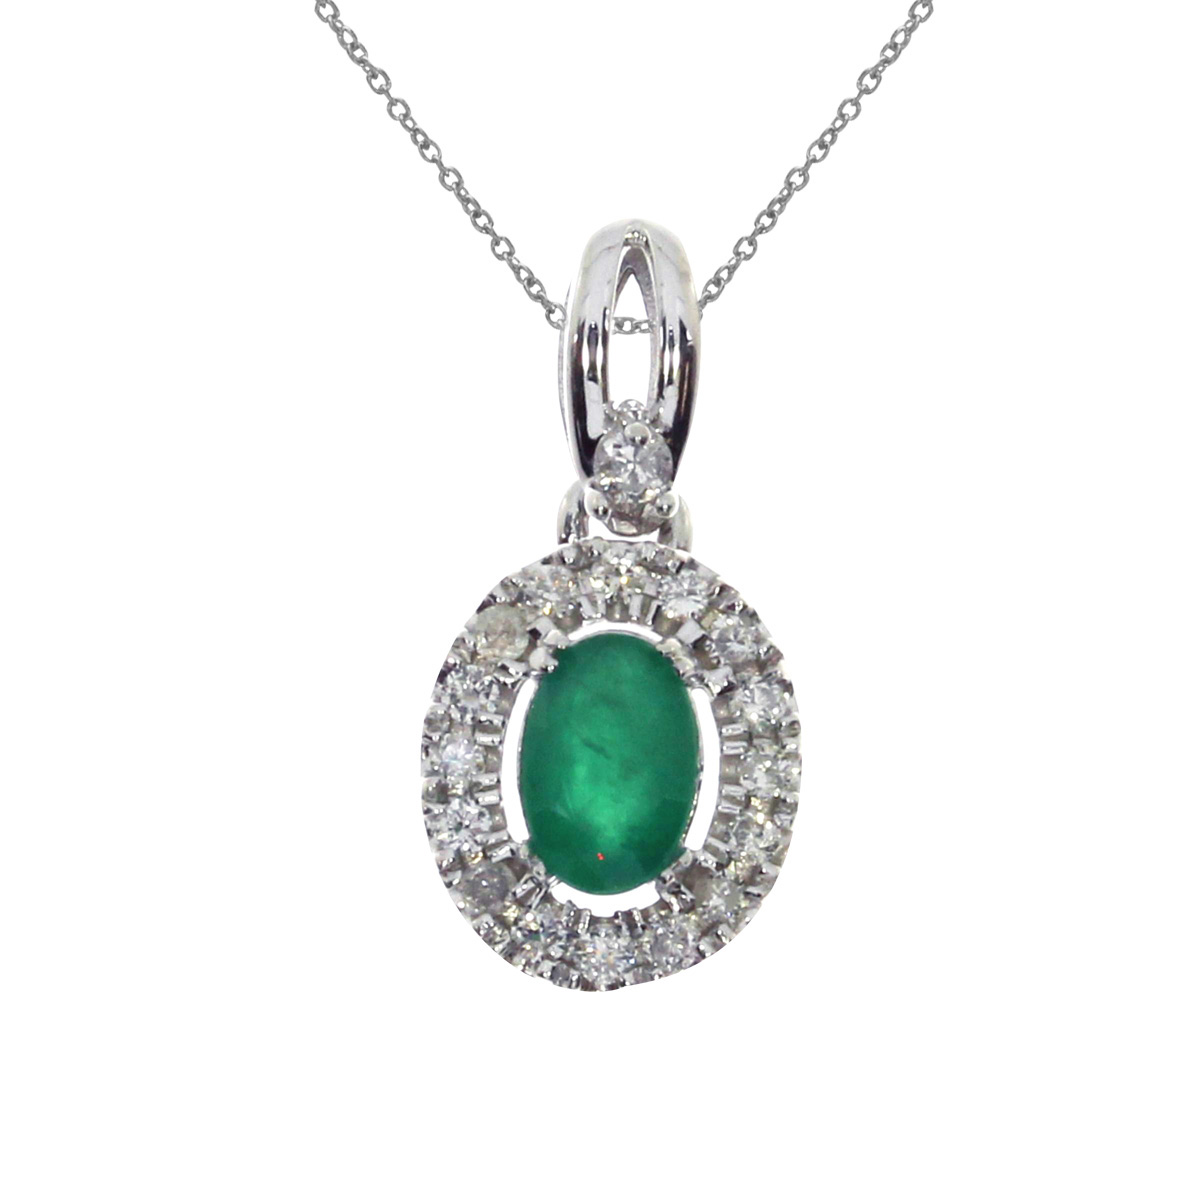 The genuine 6x4 mm oval emerald gives this pendant a dash of color  while the halo of natural diamonds creates shimmering radiance.